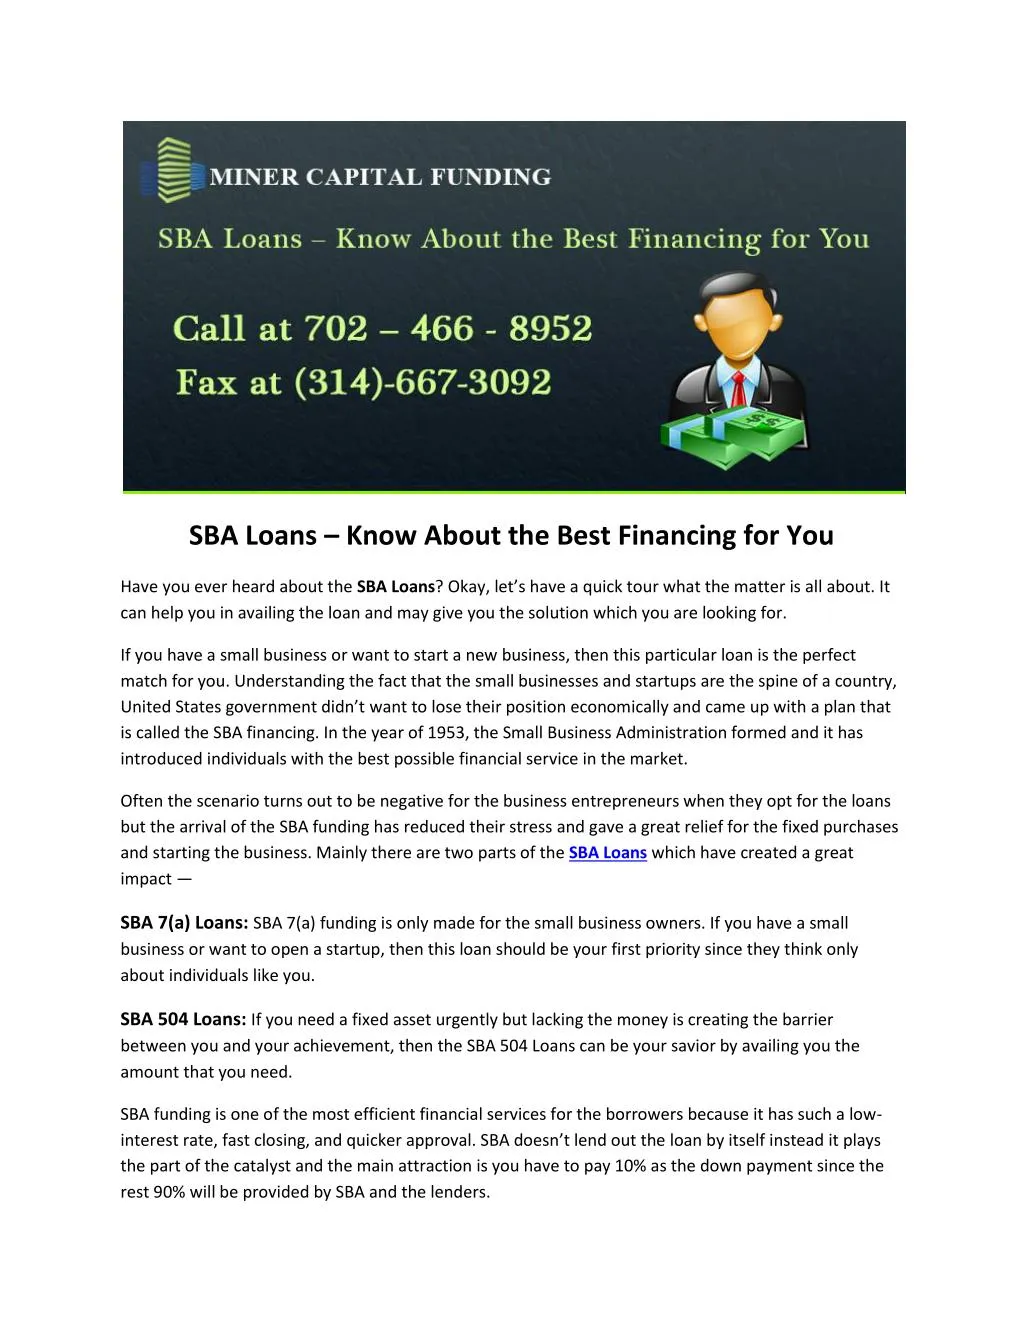 sba loans know about the best financing for you